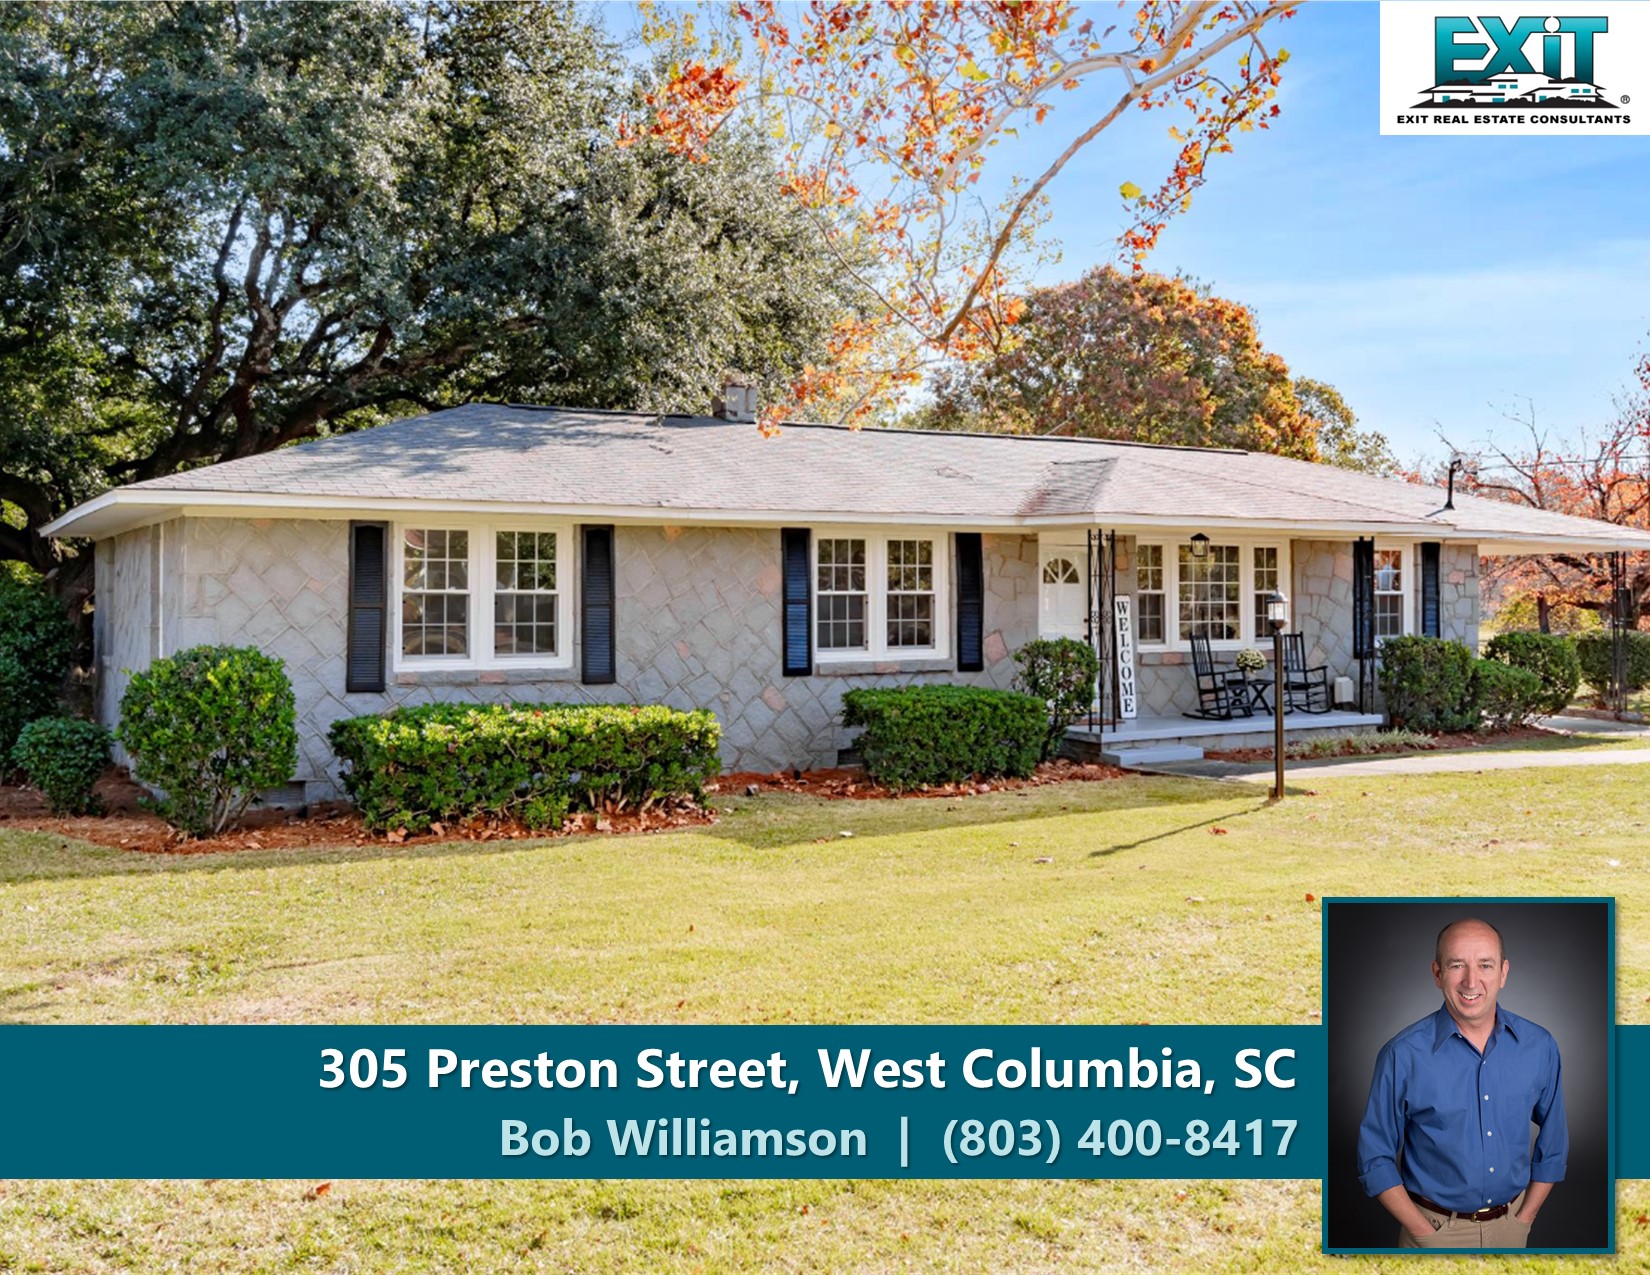 Just listed in West Columbia